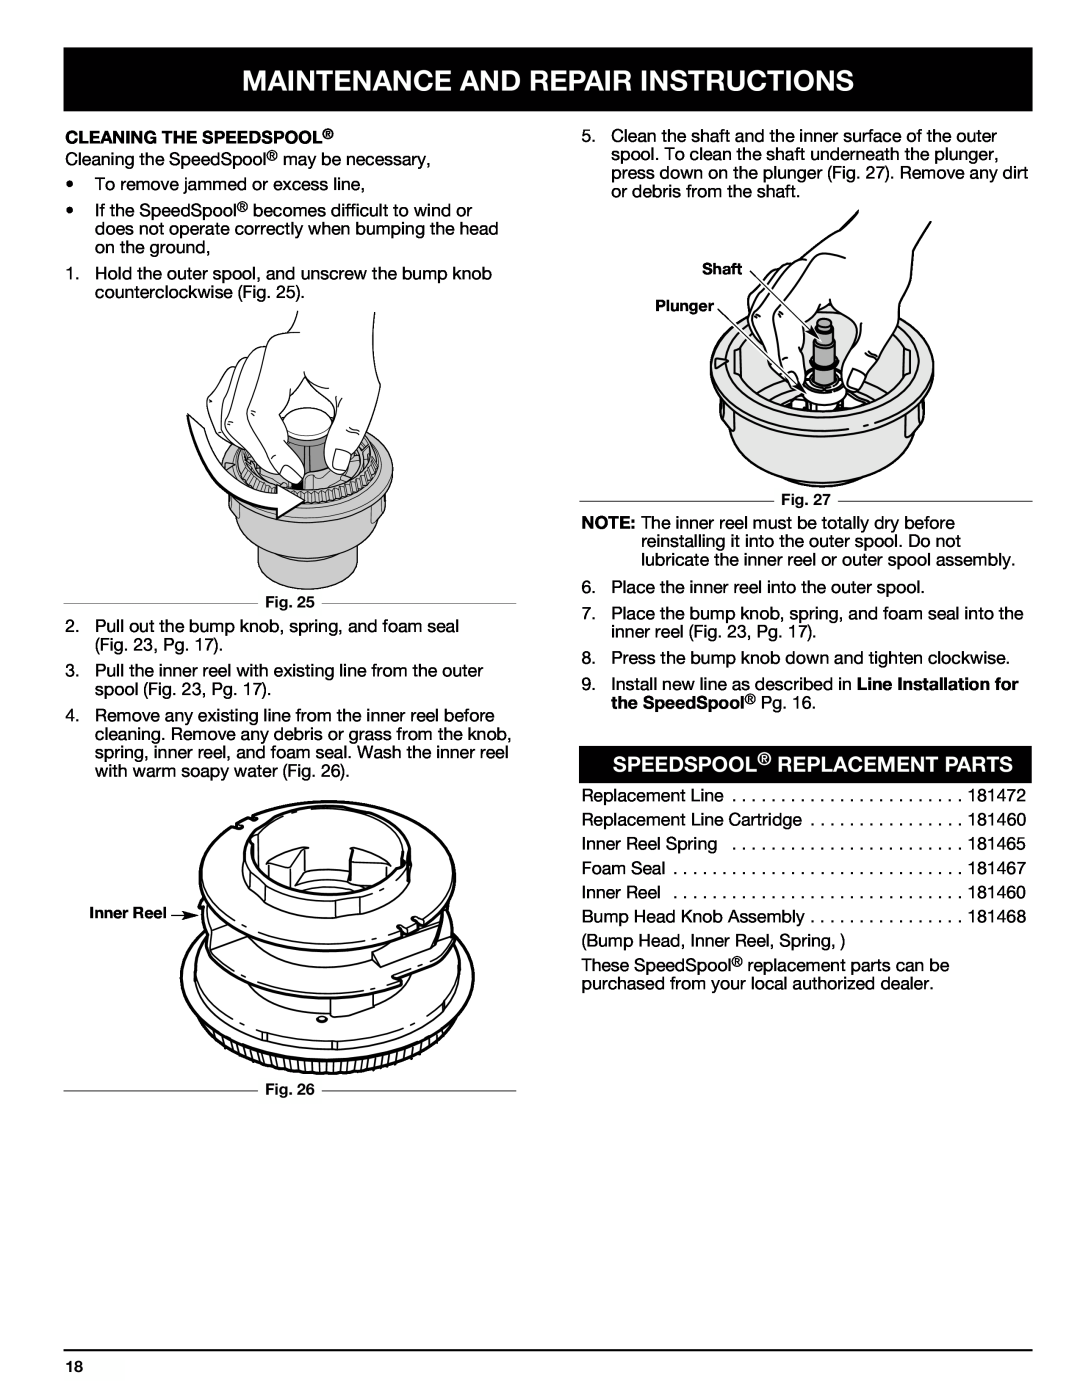 Ryobi Outdoor 875r manual Speedspool Replacement Parts, Maintenance And Repair Instructions, Cleaning The Speedspool 